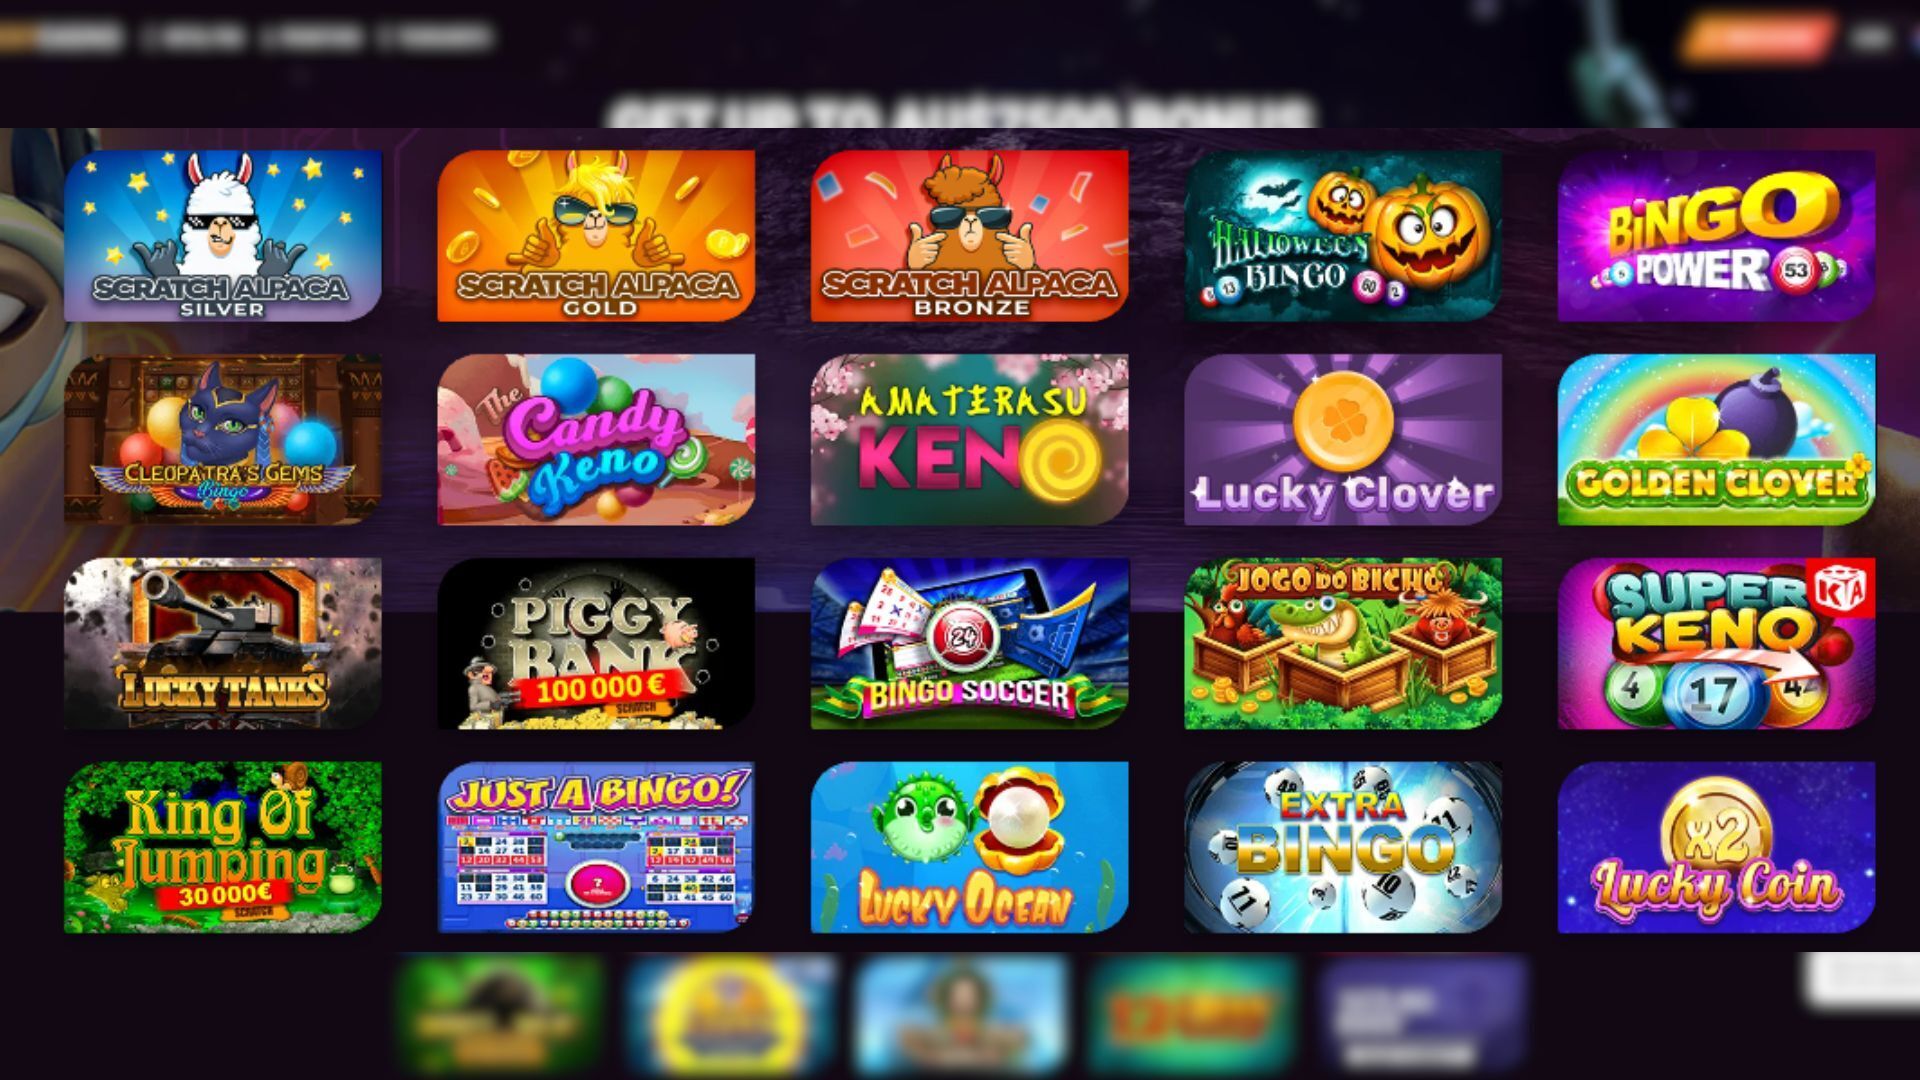 This is a screenshot of the Specialty Games at Ricky Casino in Australia